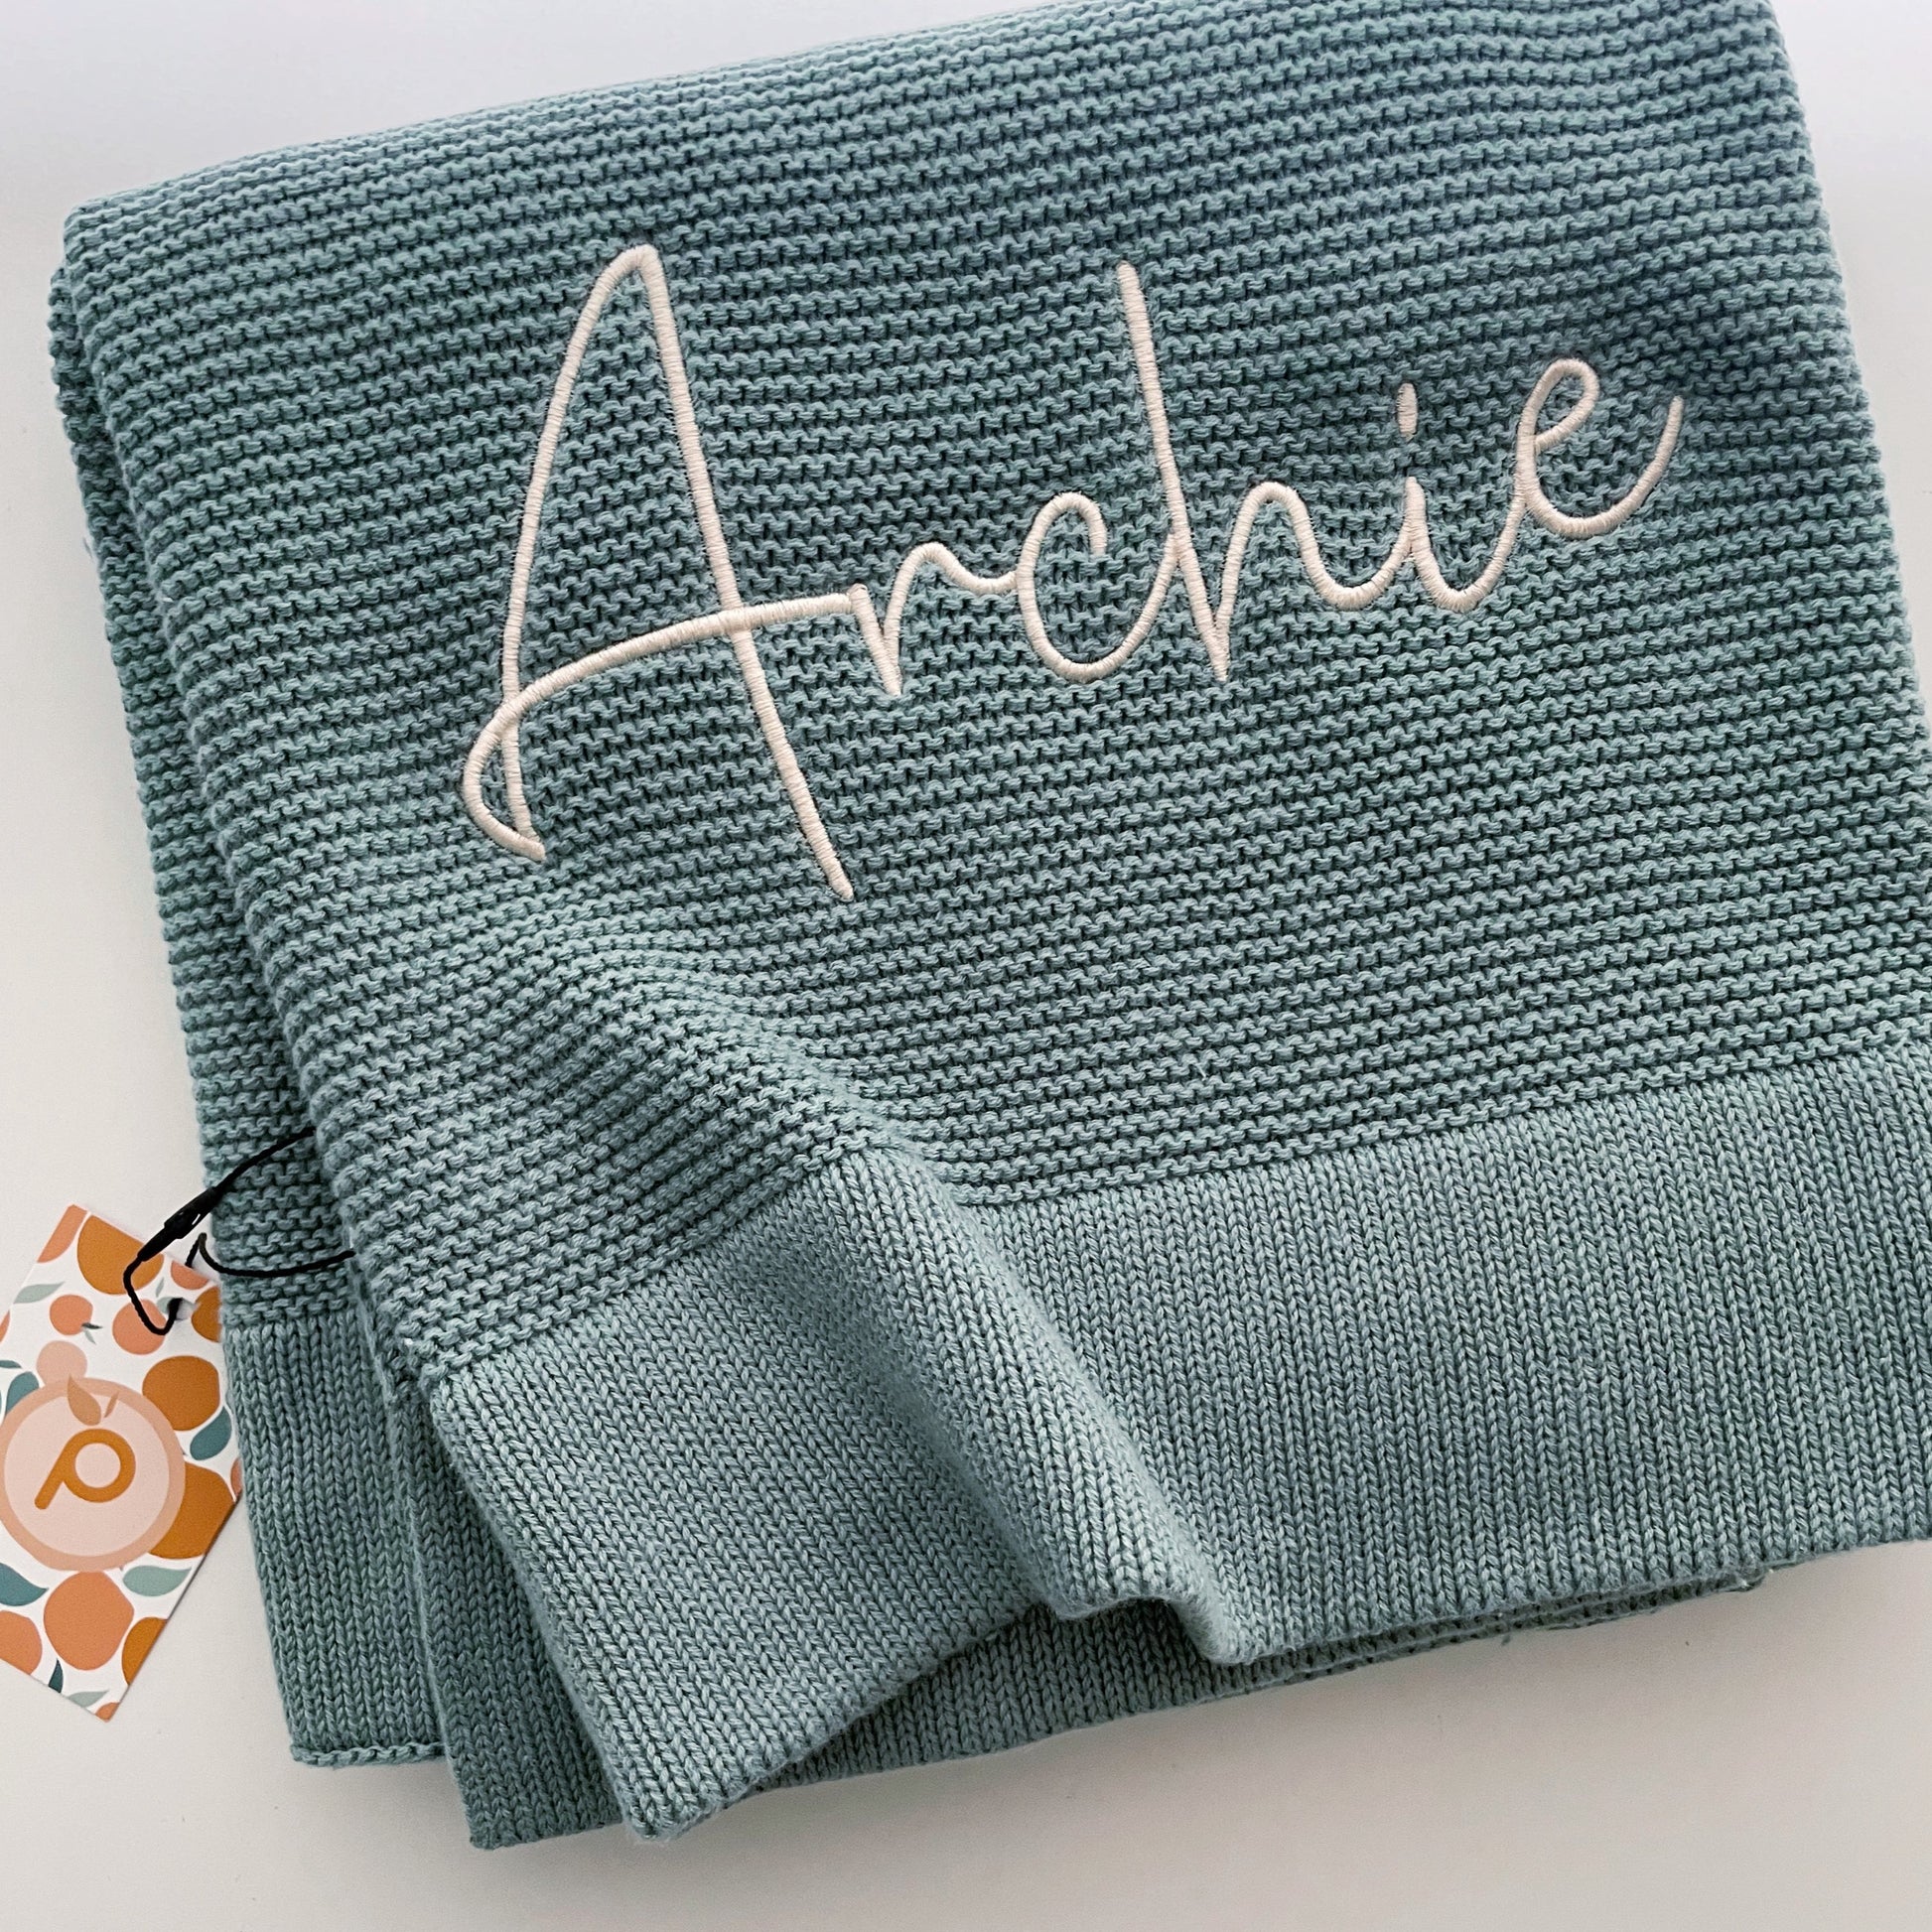 Seamist green coloured folded cotton blanket with the name Archie stitched onto it.